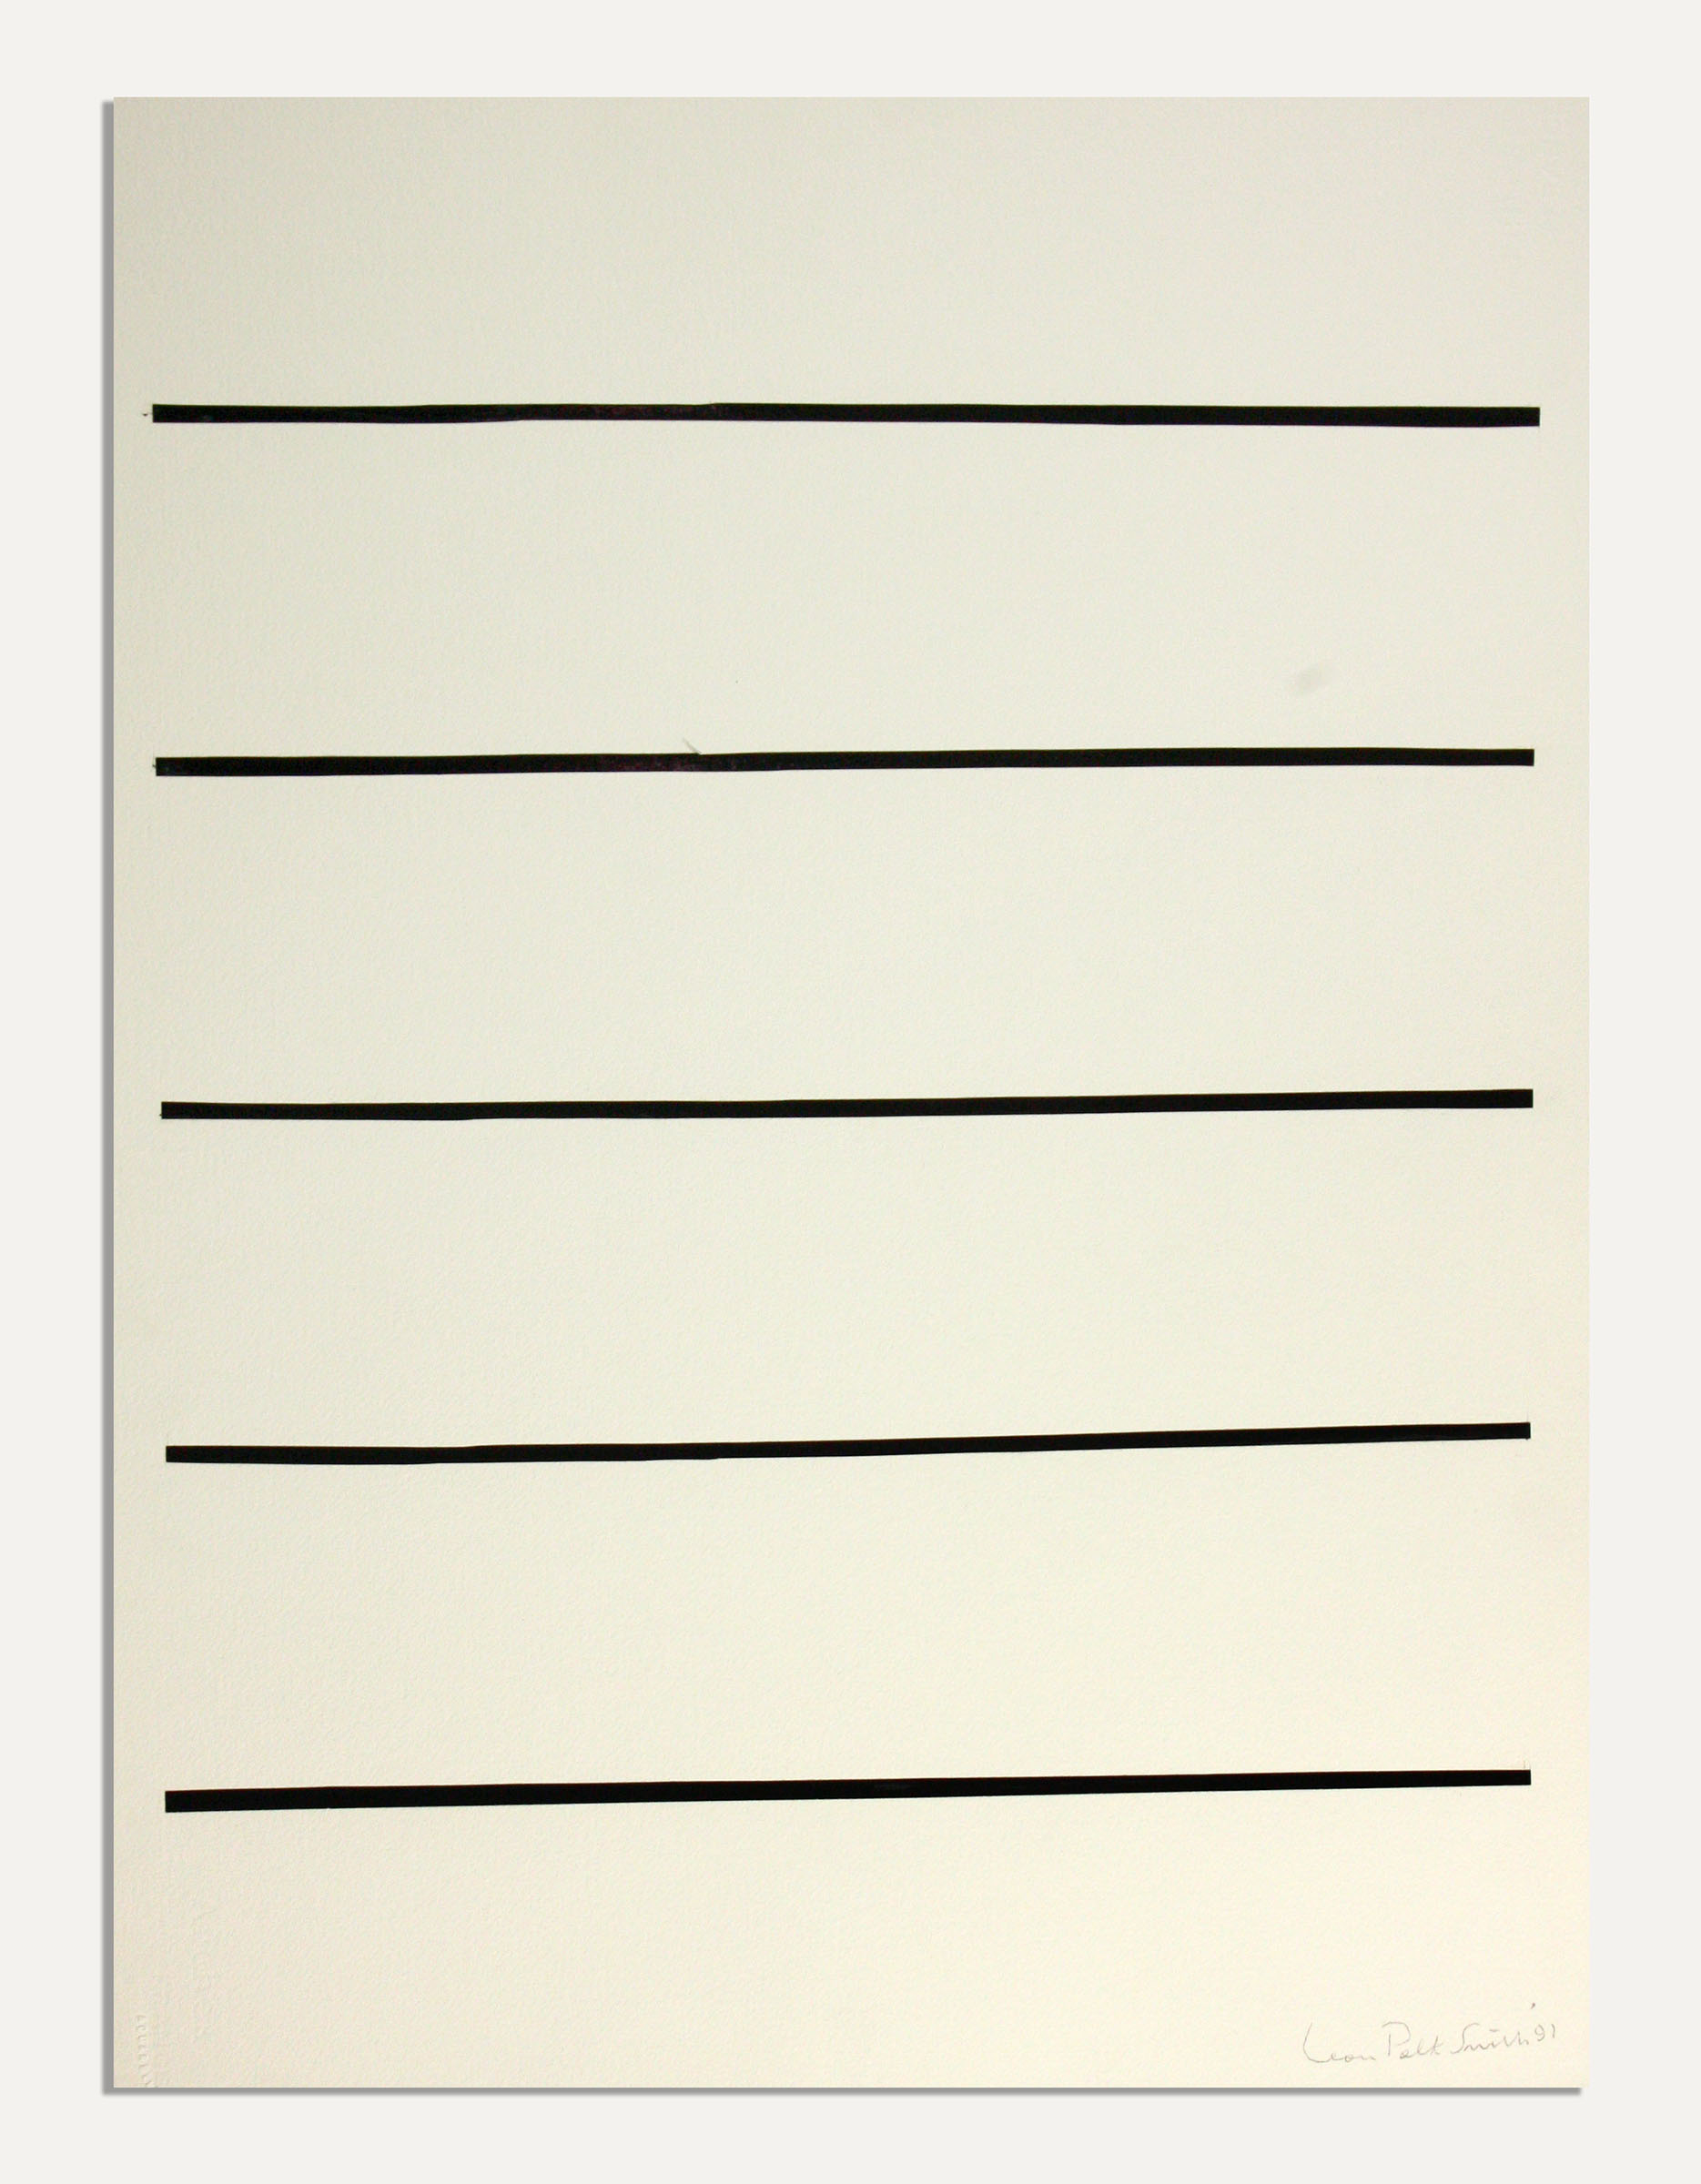 untitled, 1991. Artist tape on paper Sheet Size: 29 7/8 x 22 1/4 in.